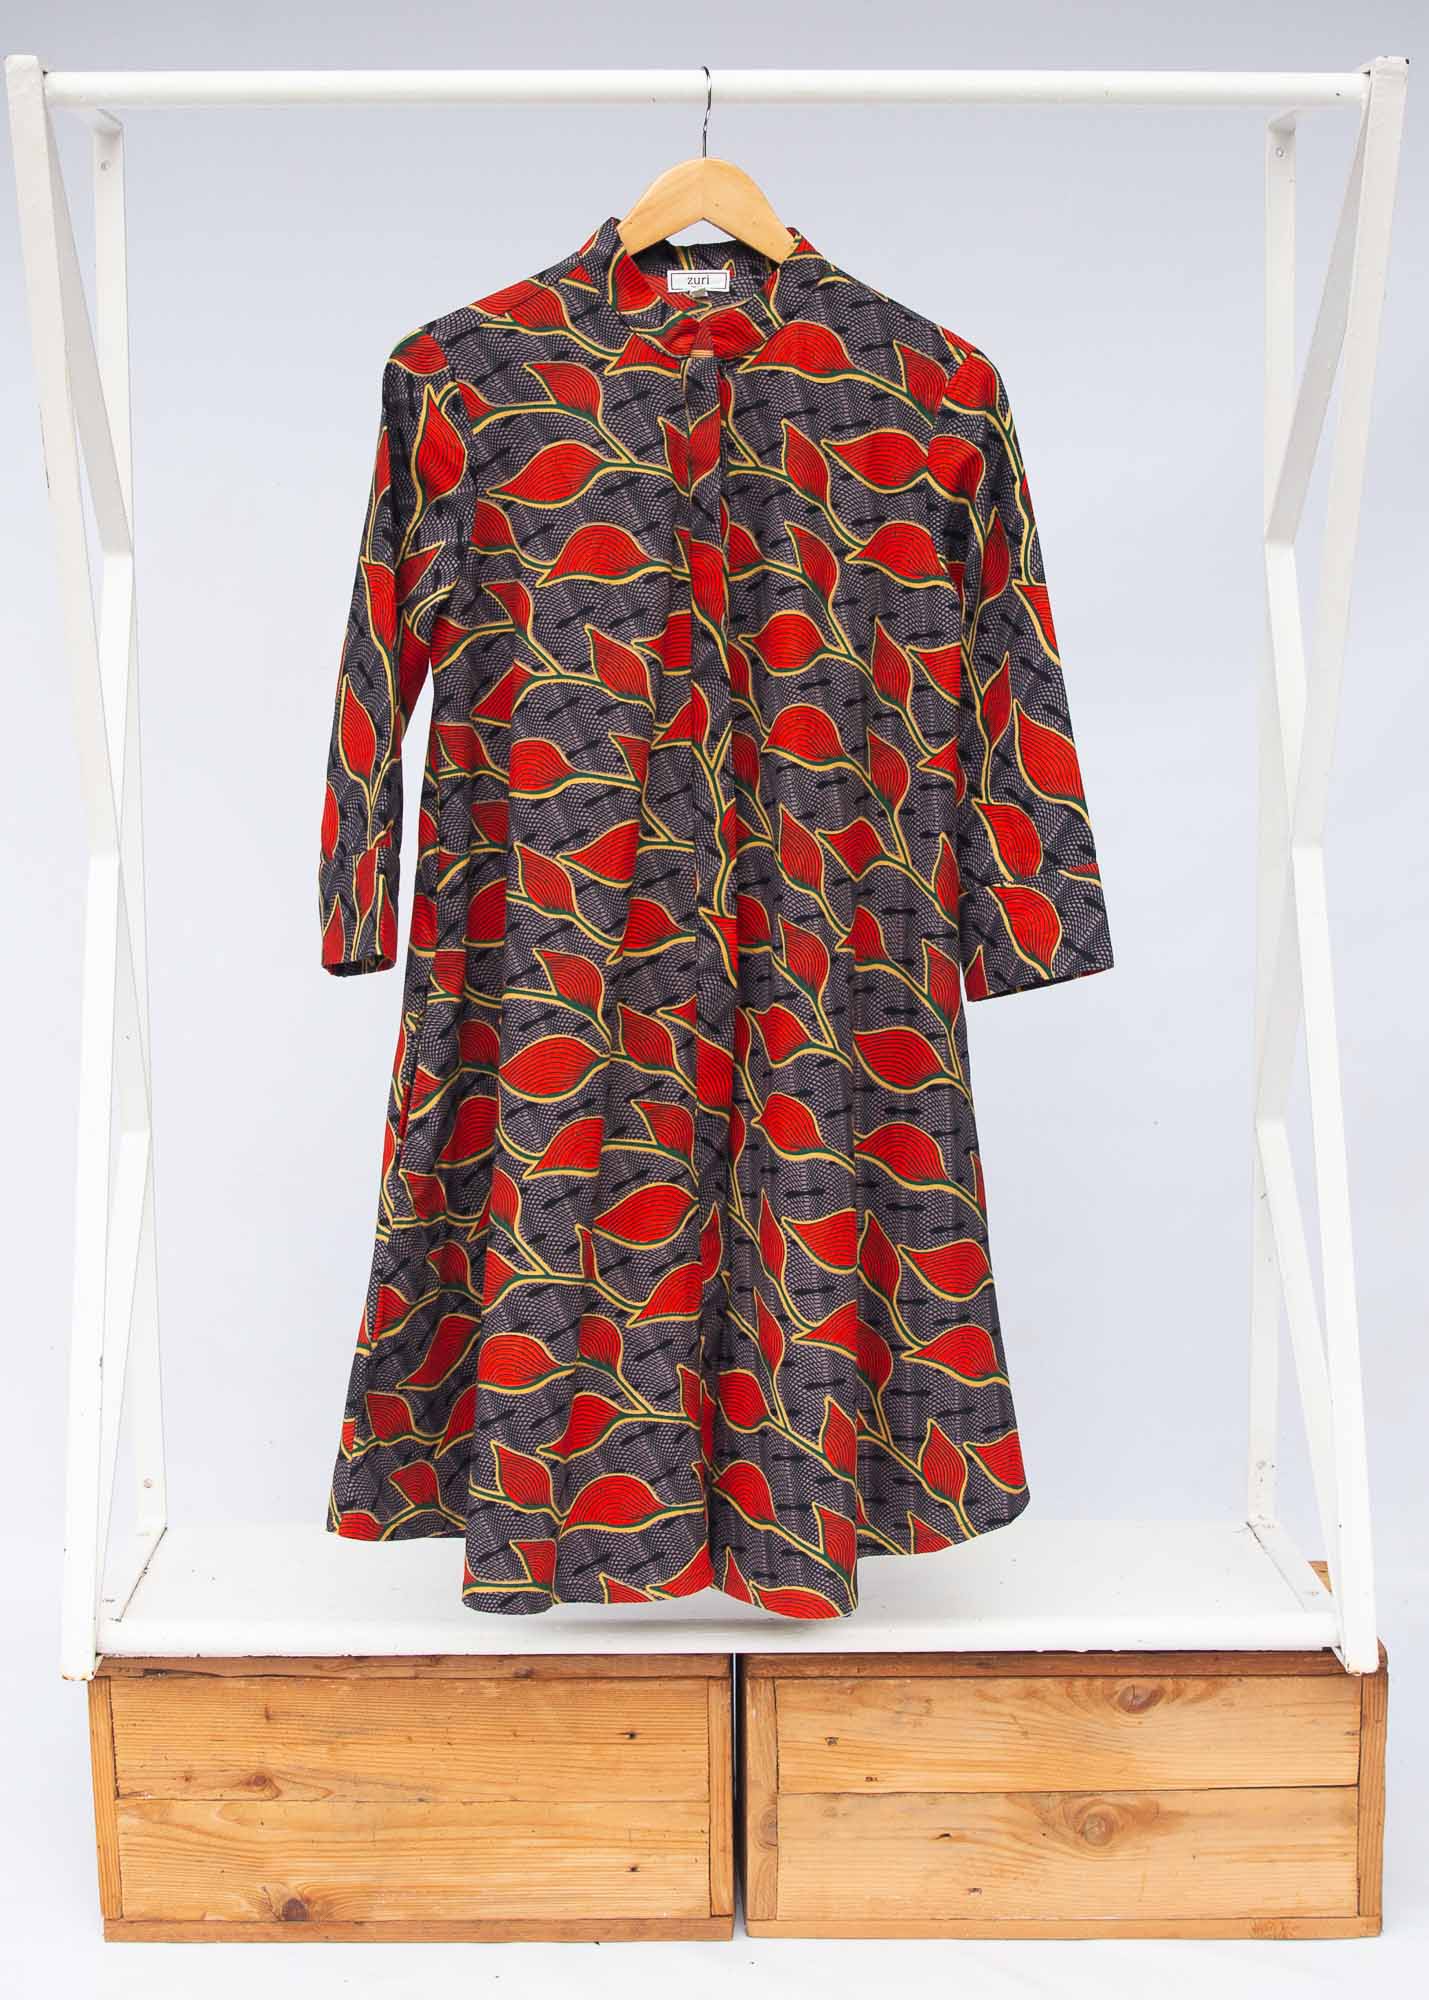 Display of grey dress with red, yellow and black leaf print